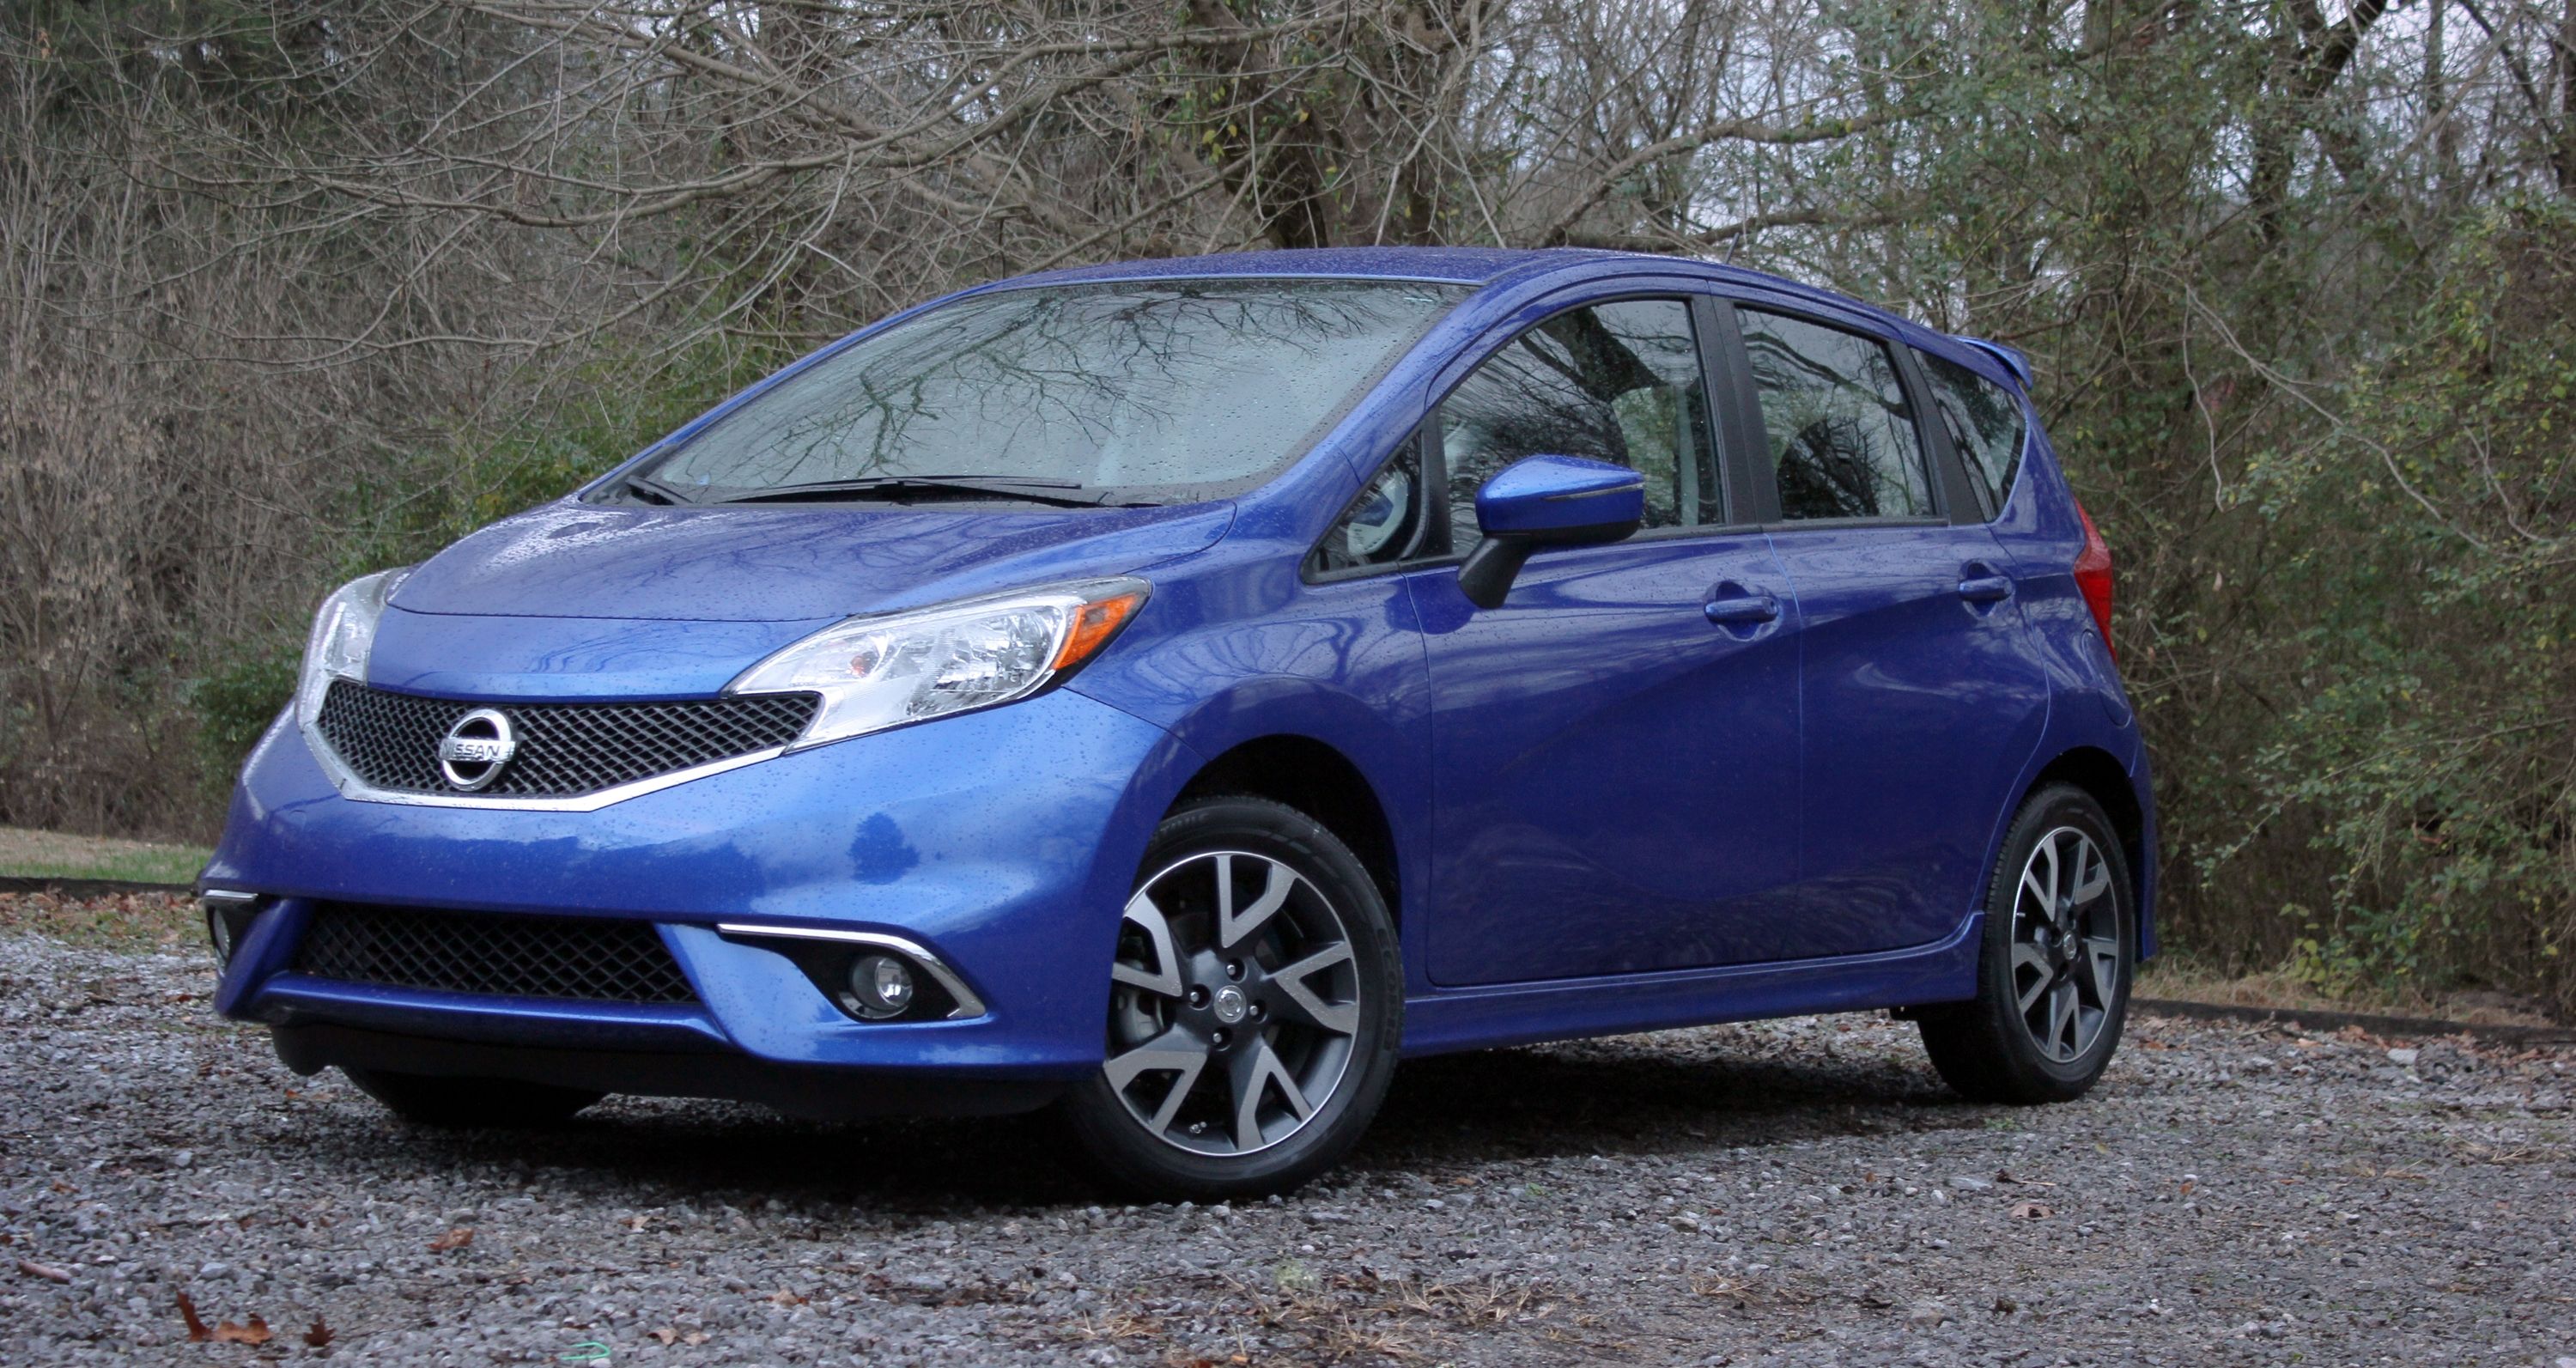  Christian Moe spent a week getting to know the 2015 Nissan Versa Note SR; find out what he thinks at TopSpeed.com.